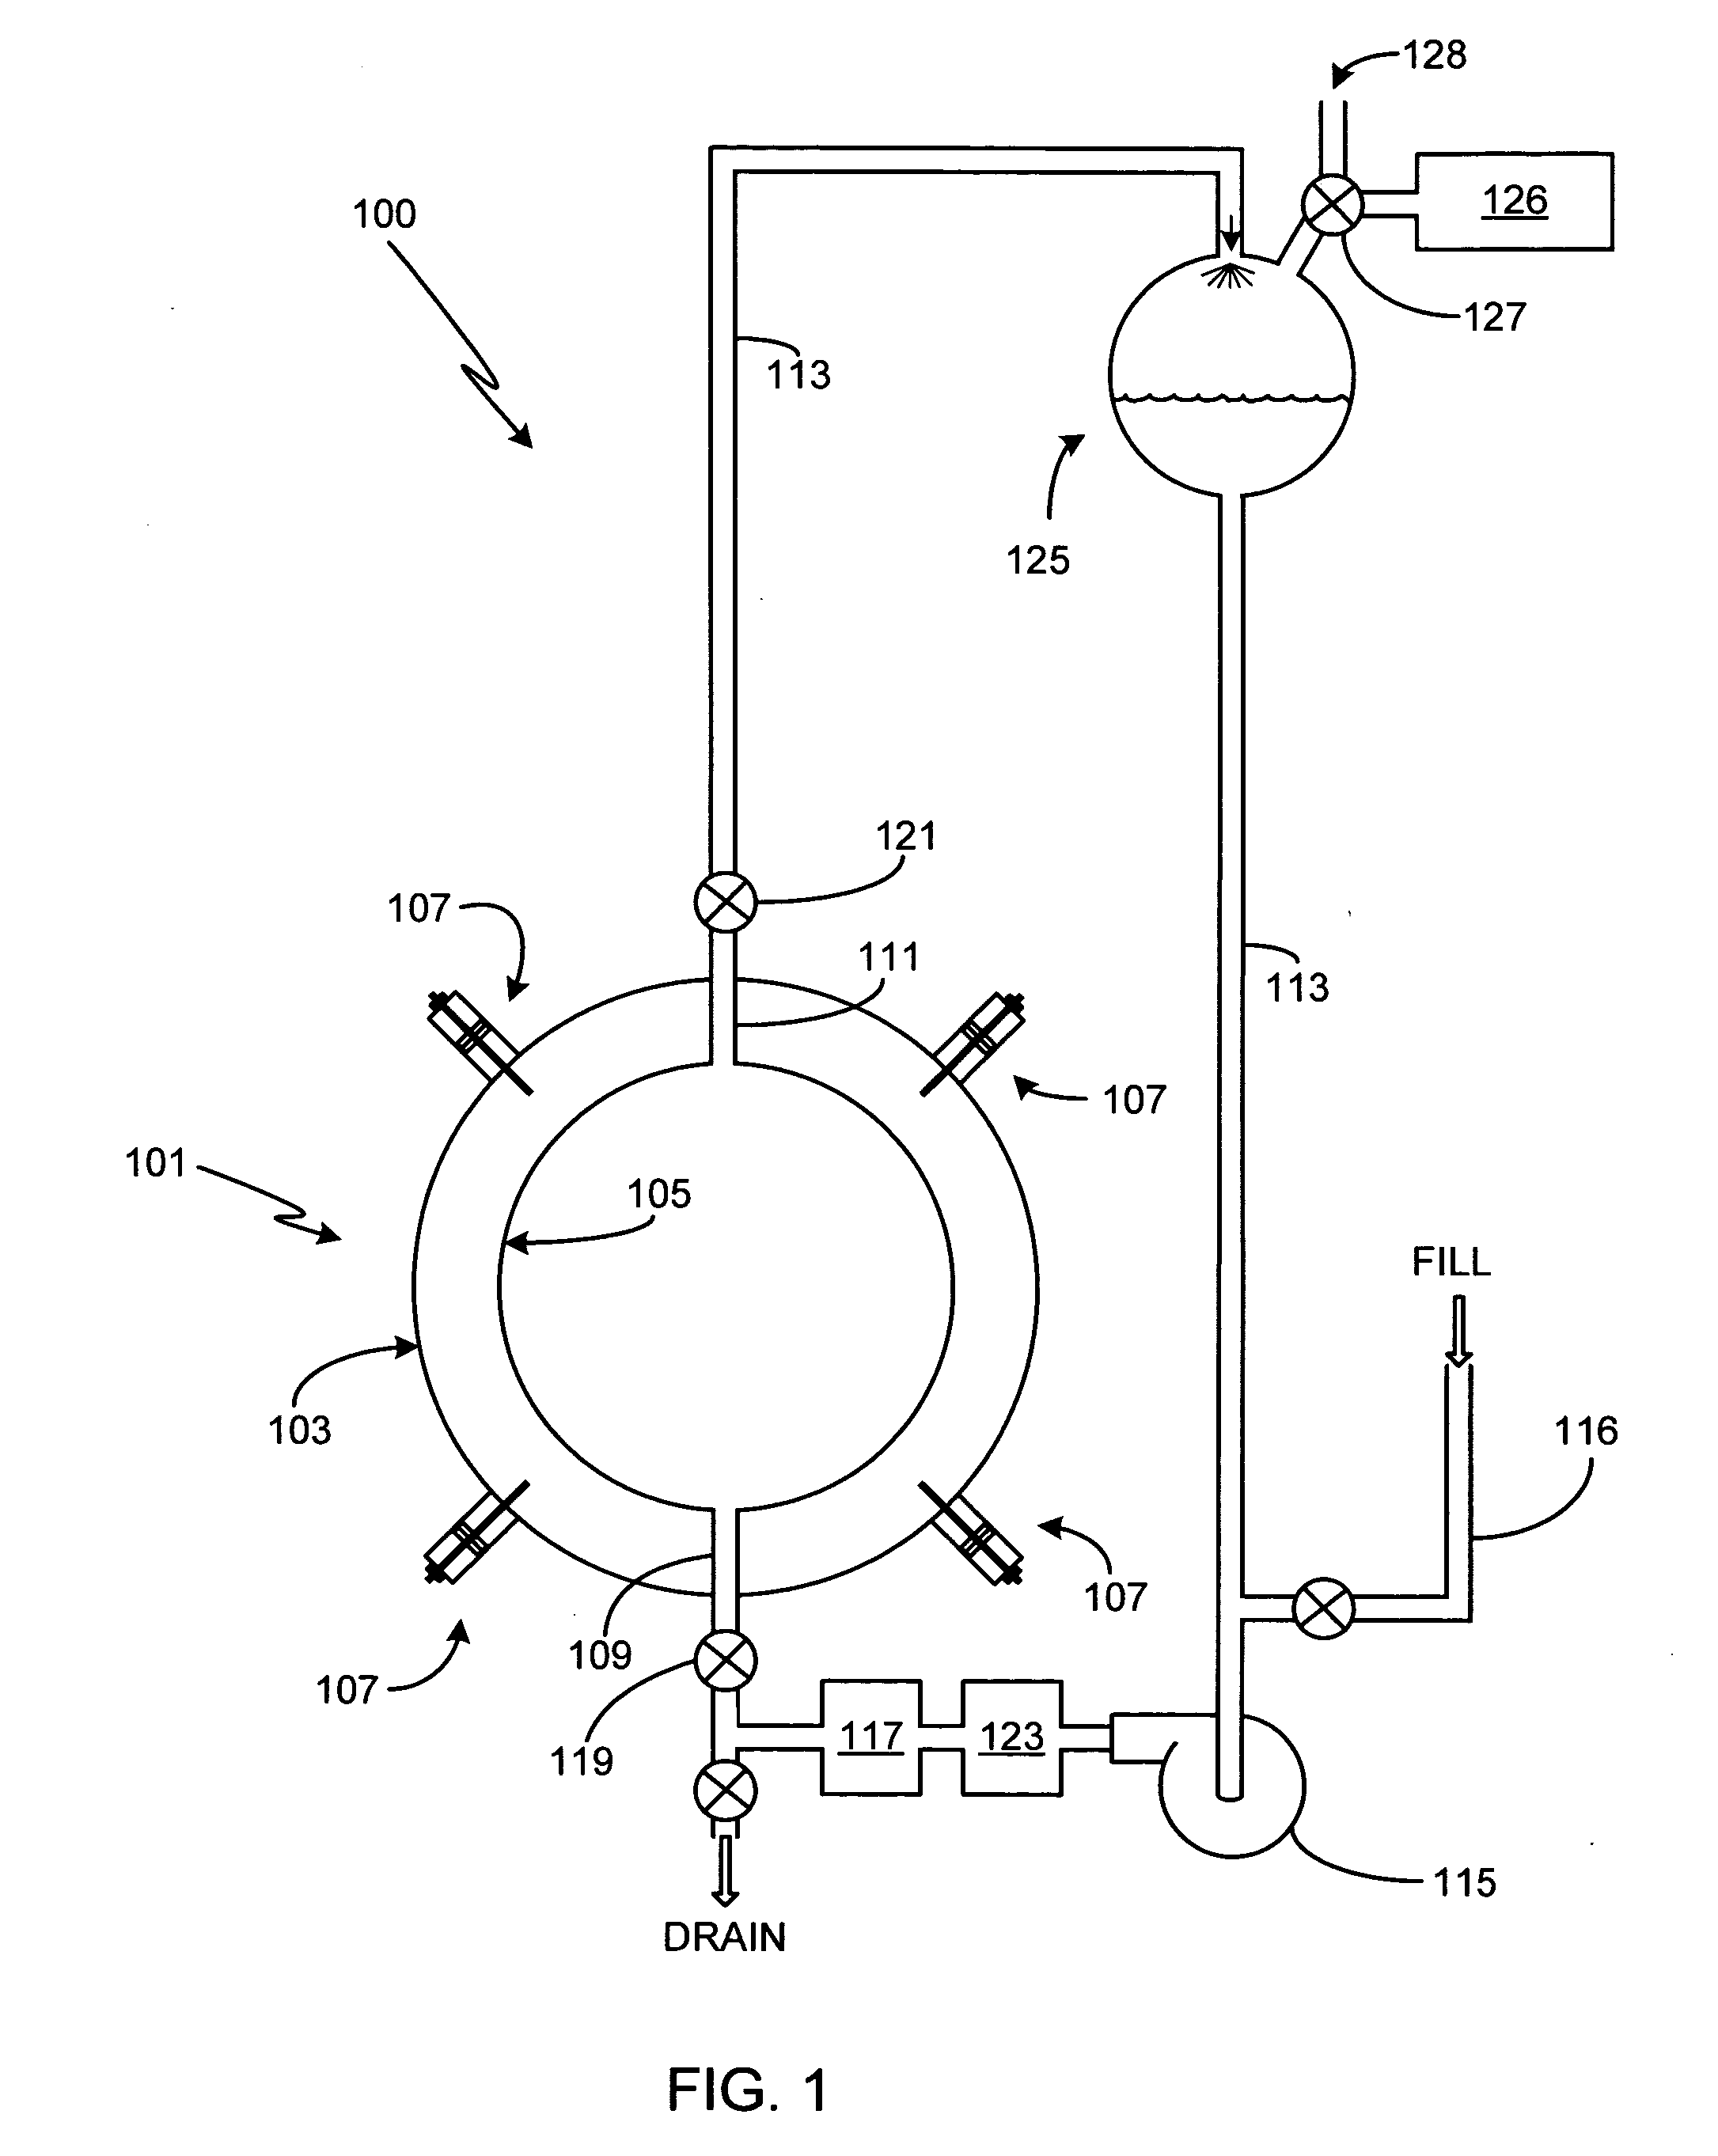 Heat exchange system for a cavitation chamber